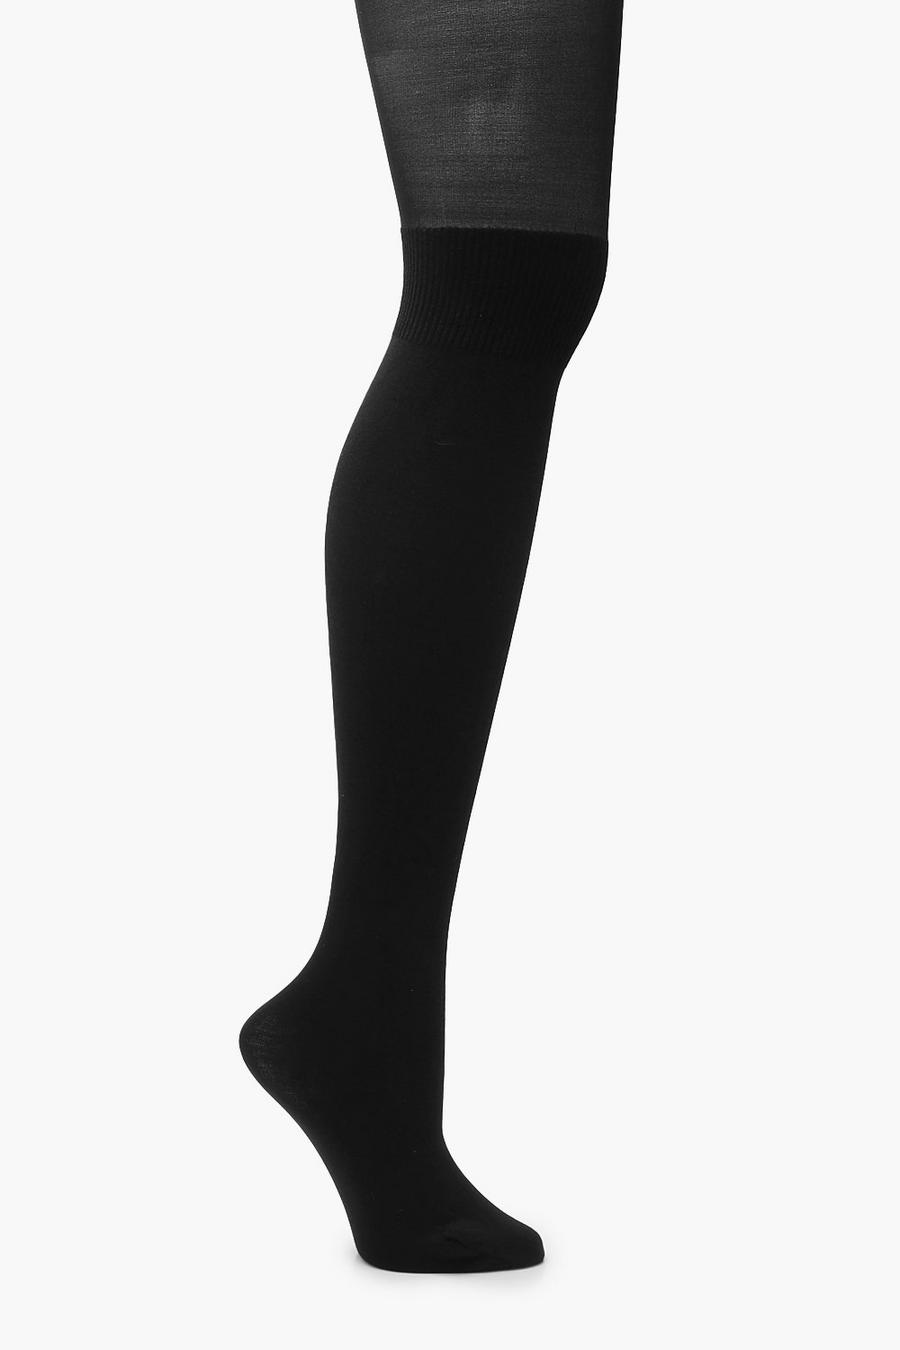 Mock over the Knee Ribbed Tights